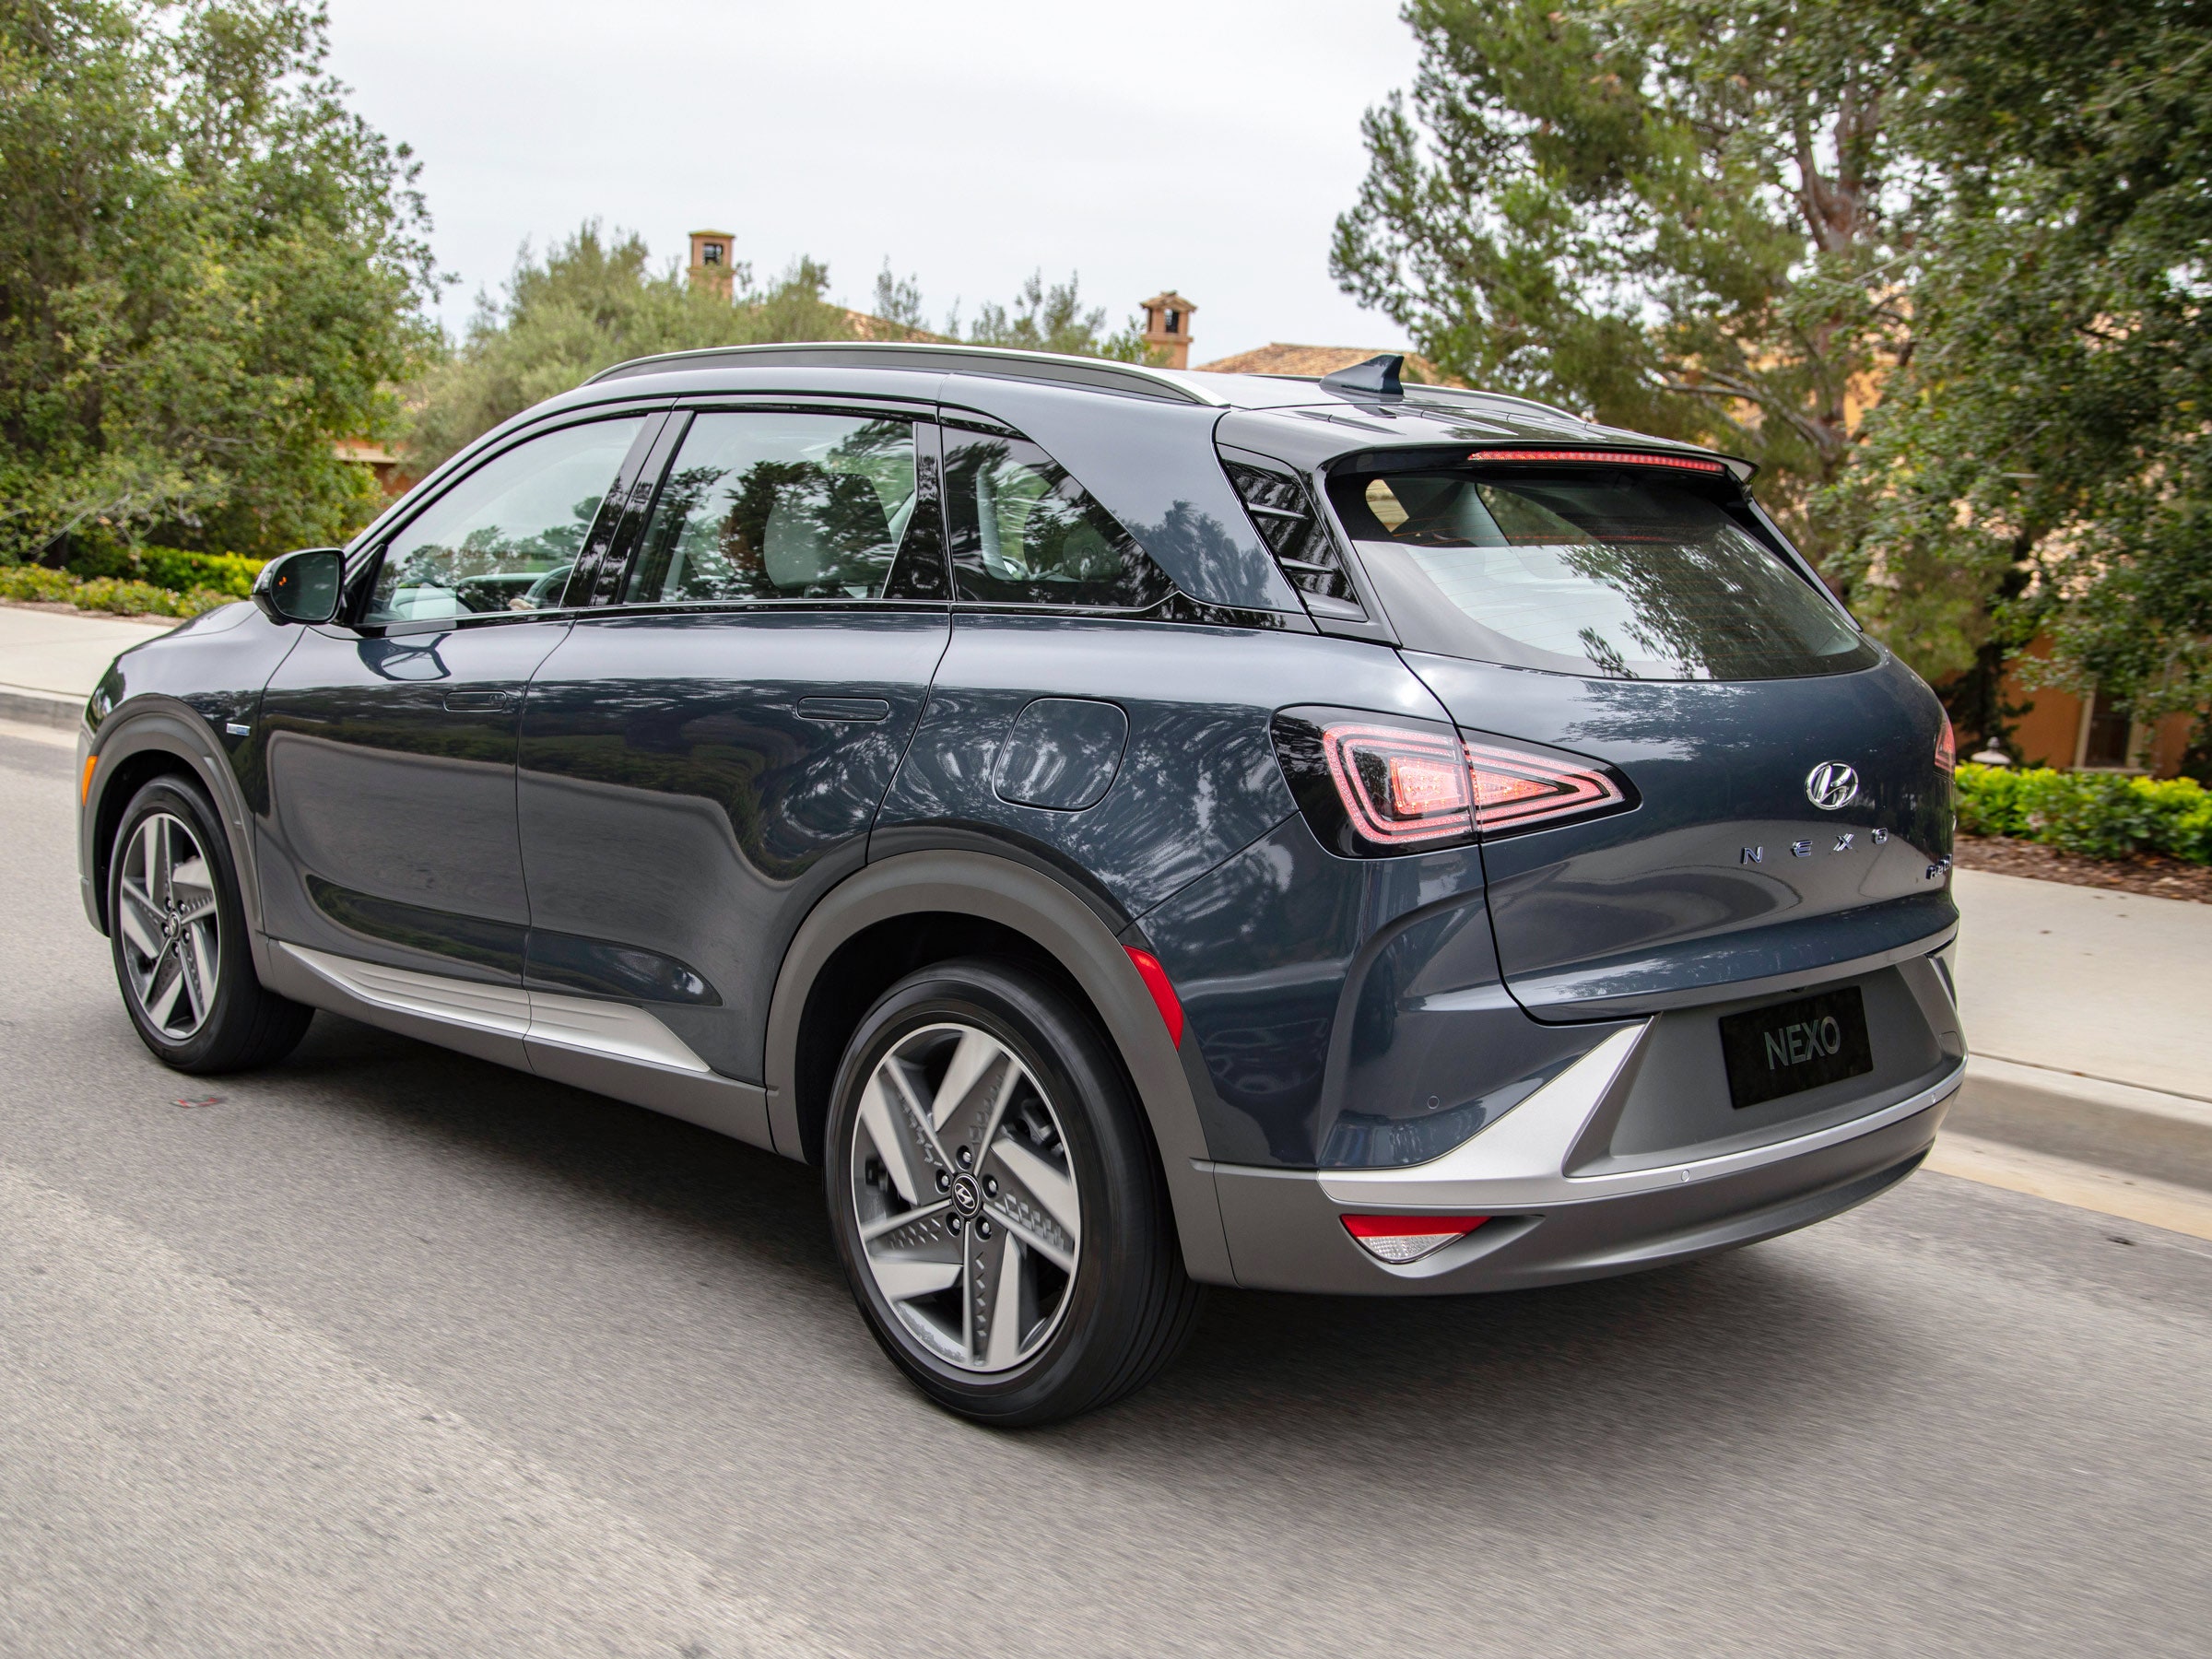 Hyundai Nexo Review: The Hydrogen Fuel Cell-Powered Electric SUV | WIRED